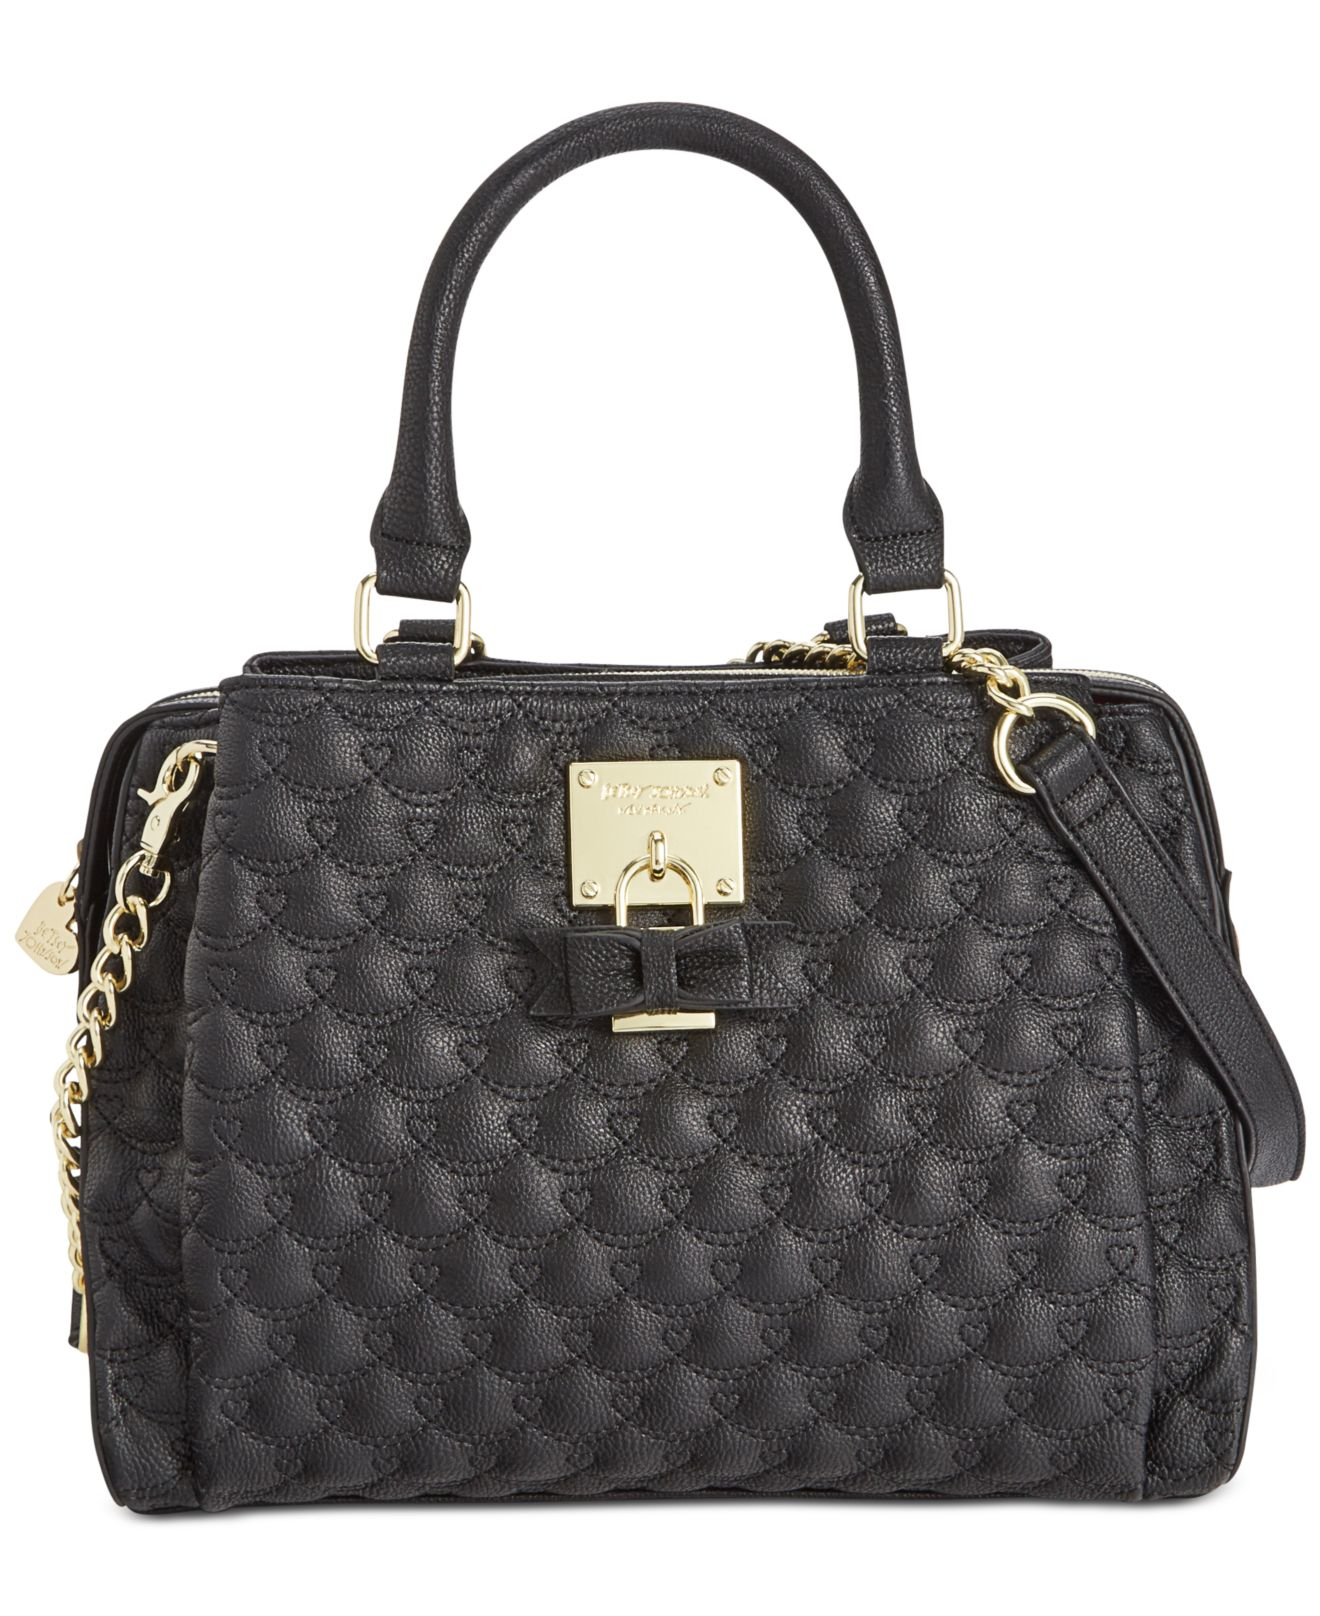 Lyst - Betsey johnson Triple Compartment Satchel in Black